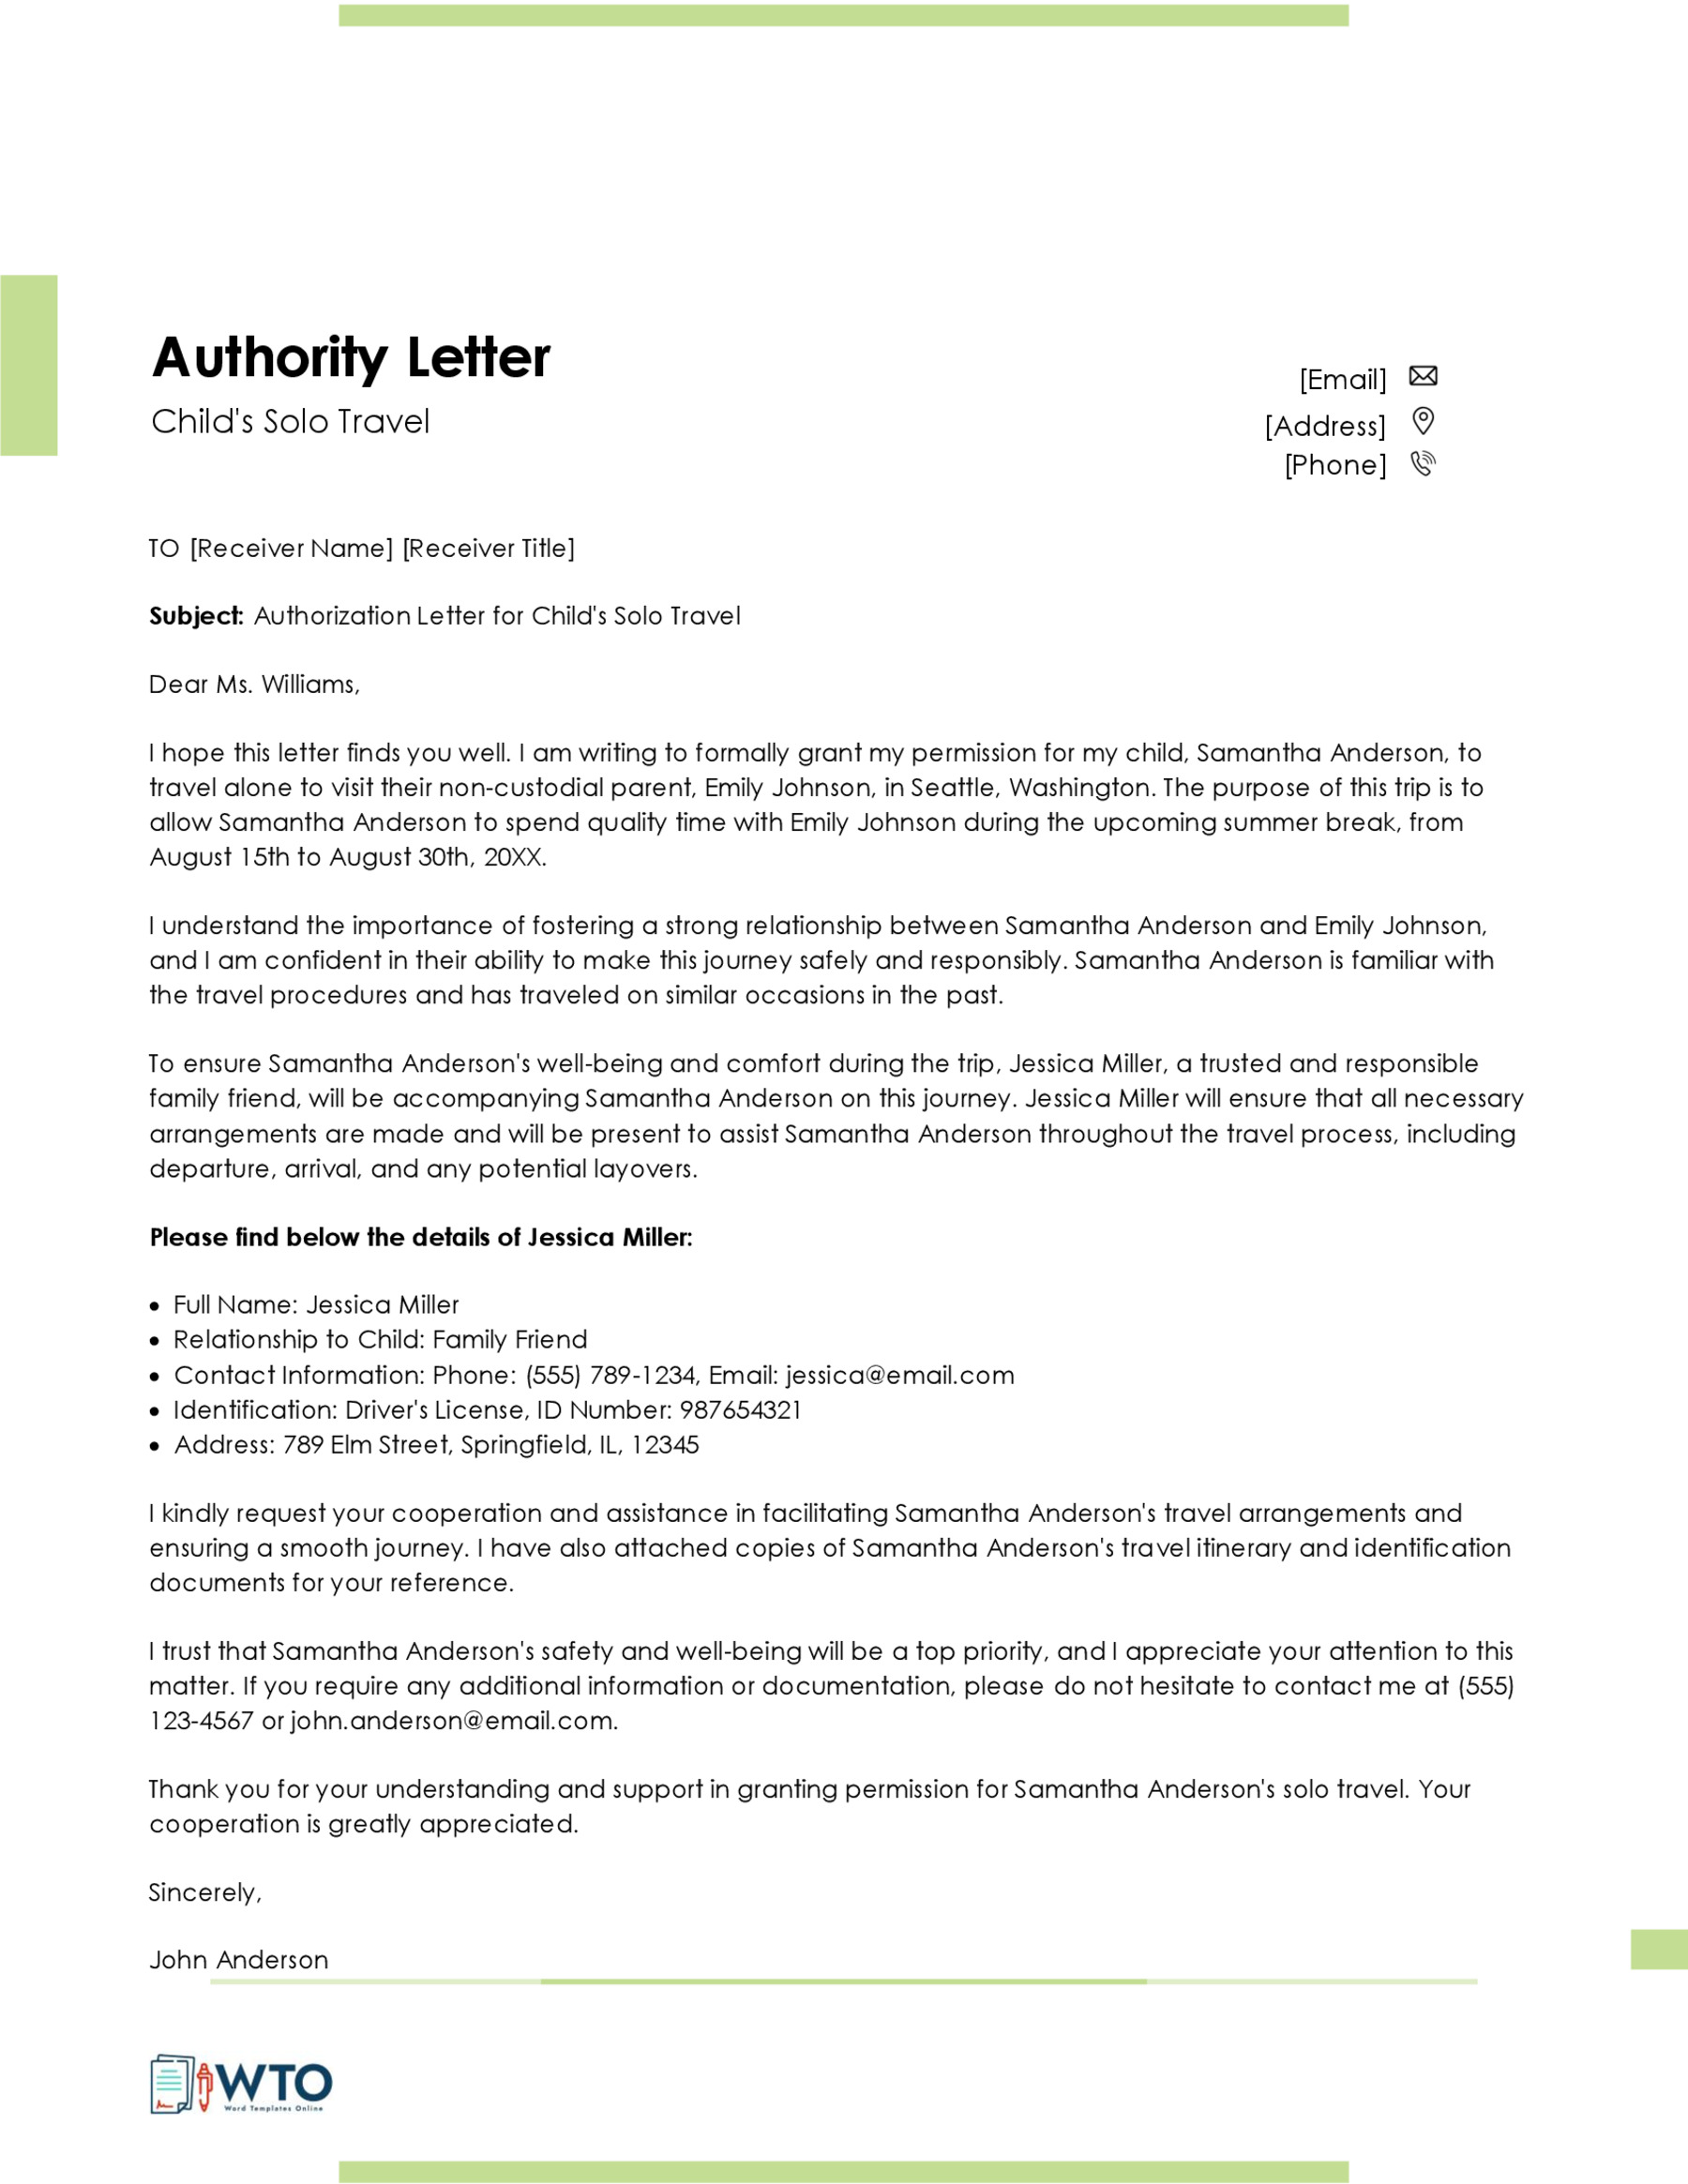 Sample Authorization Letter for a Child to Travel Alone-Ms Word Free Download